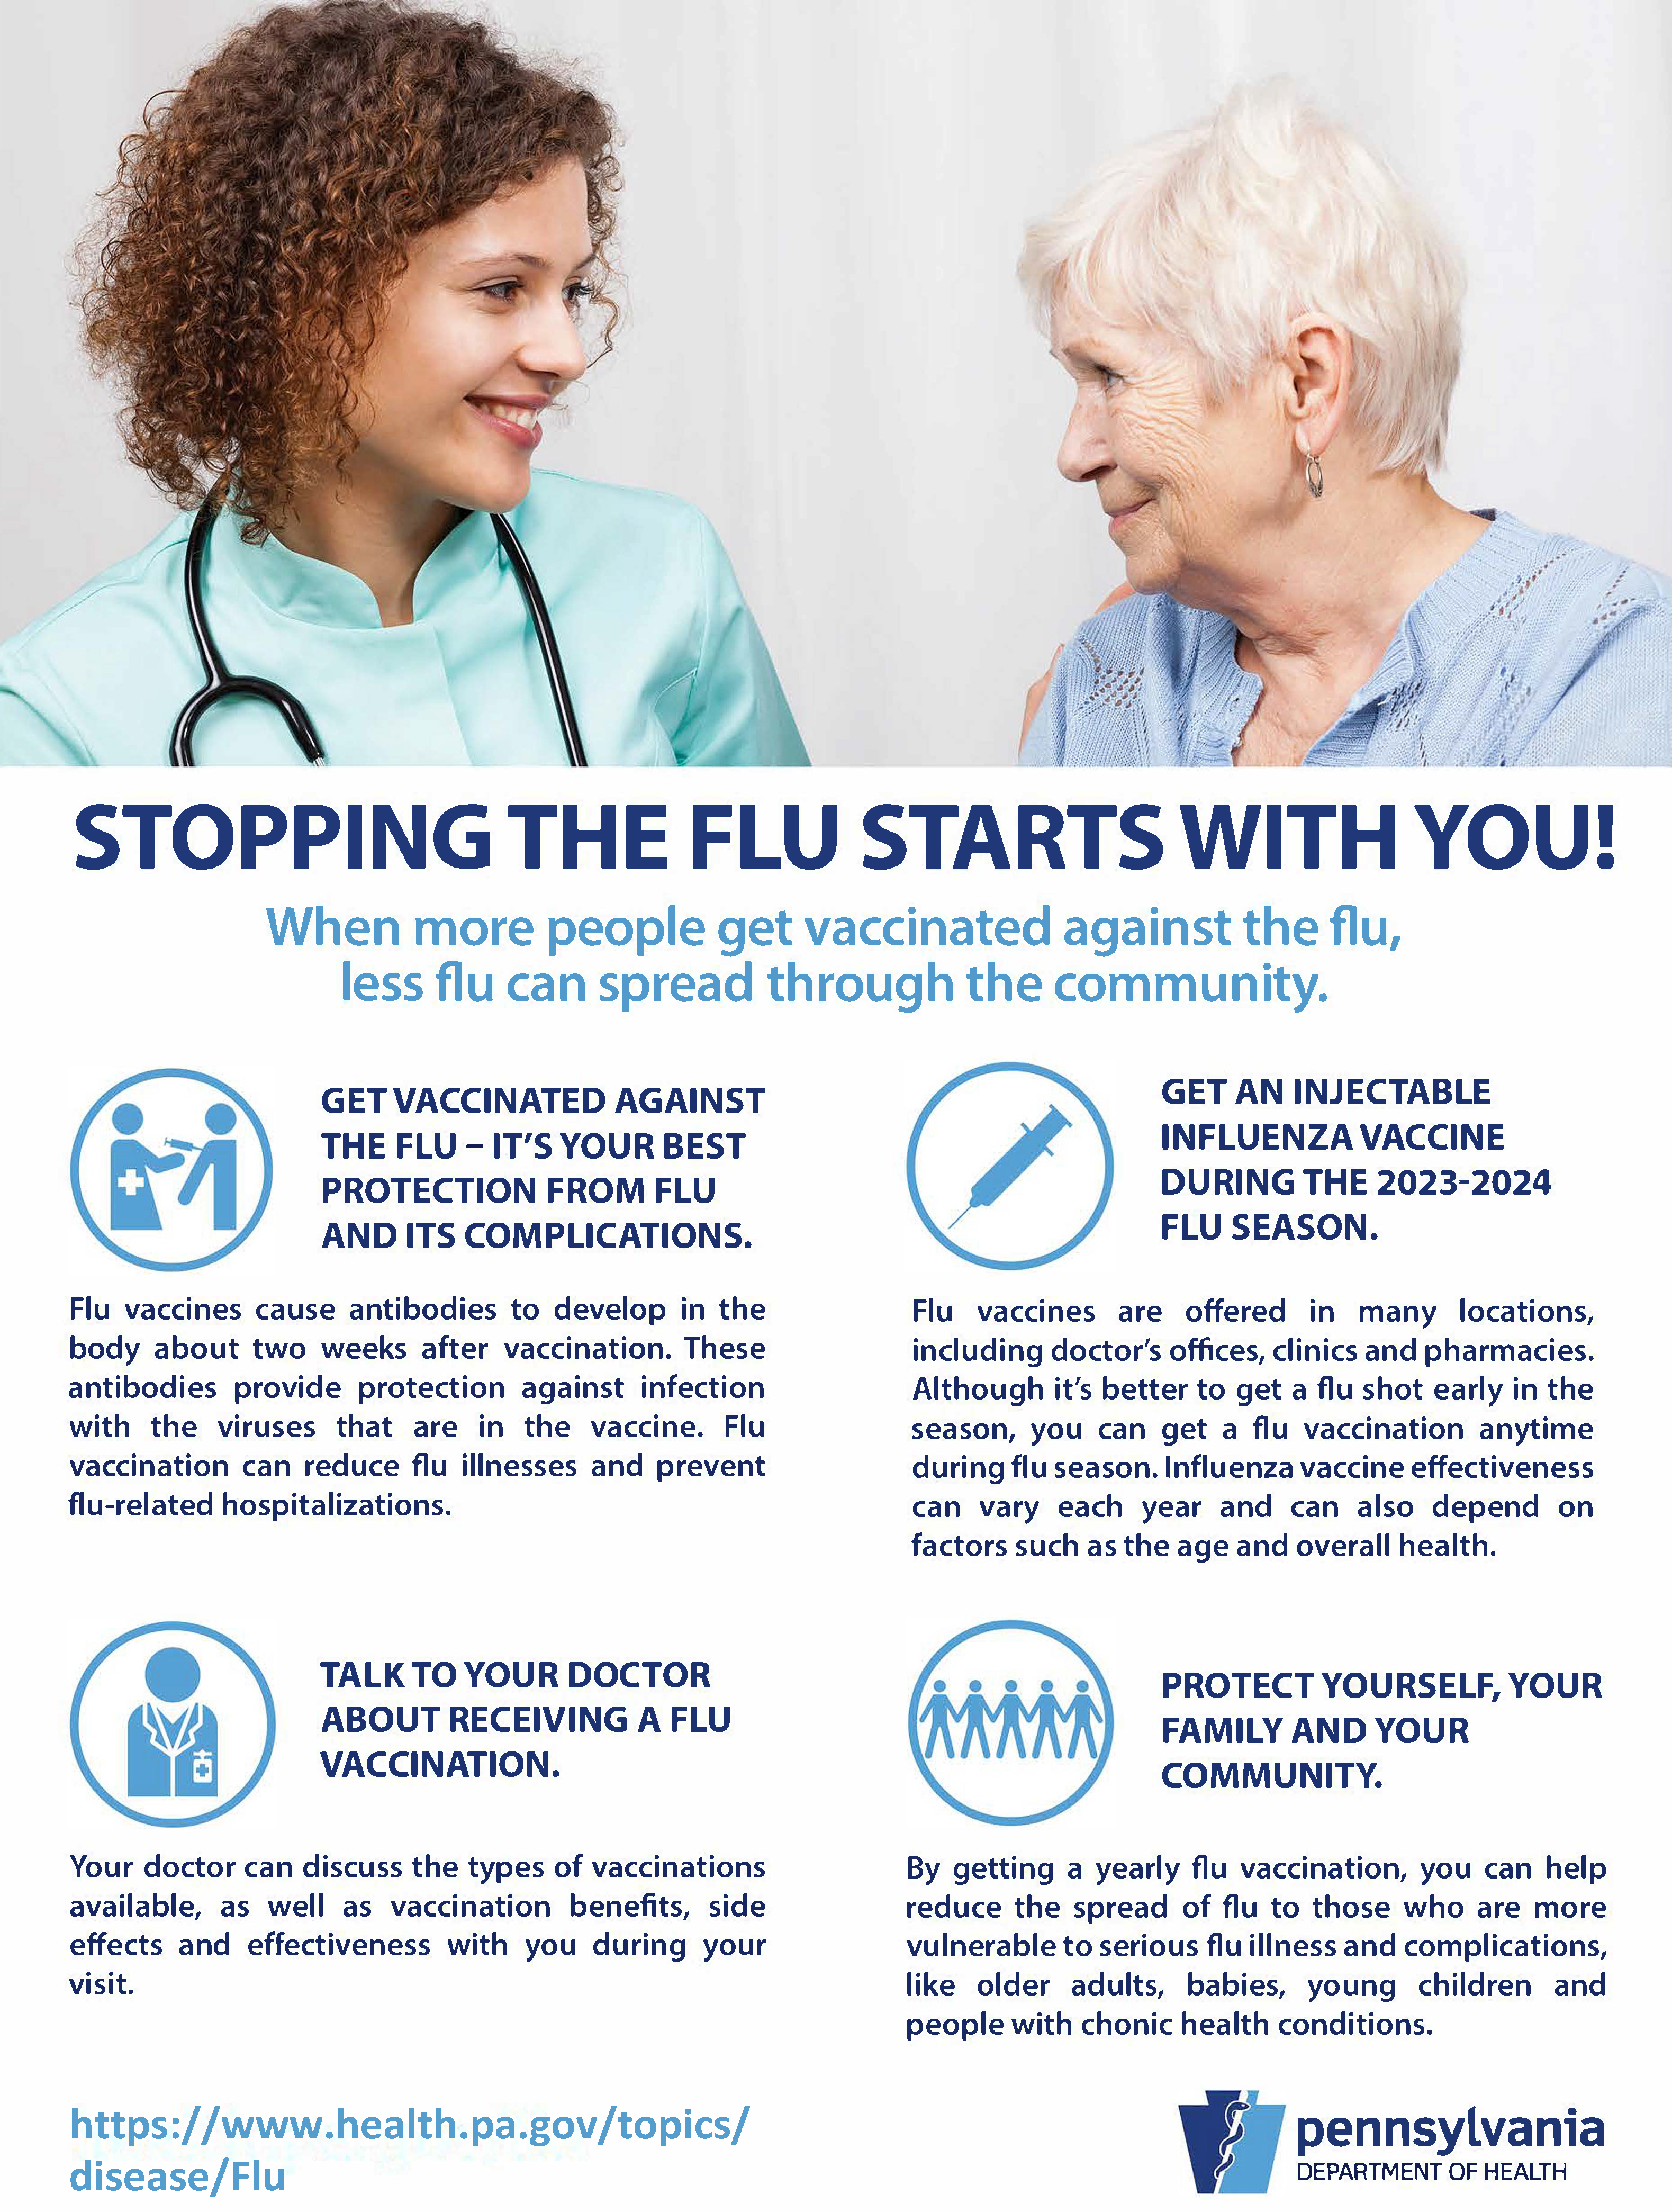 Flu fighting poster for long-term care facilities